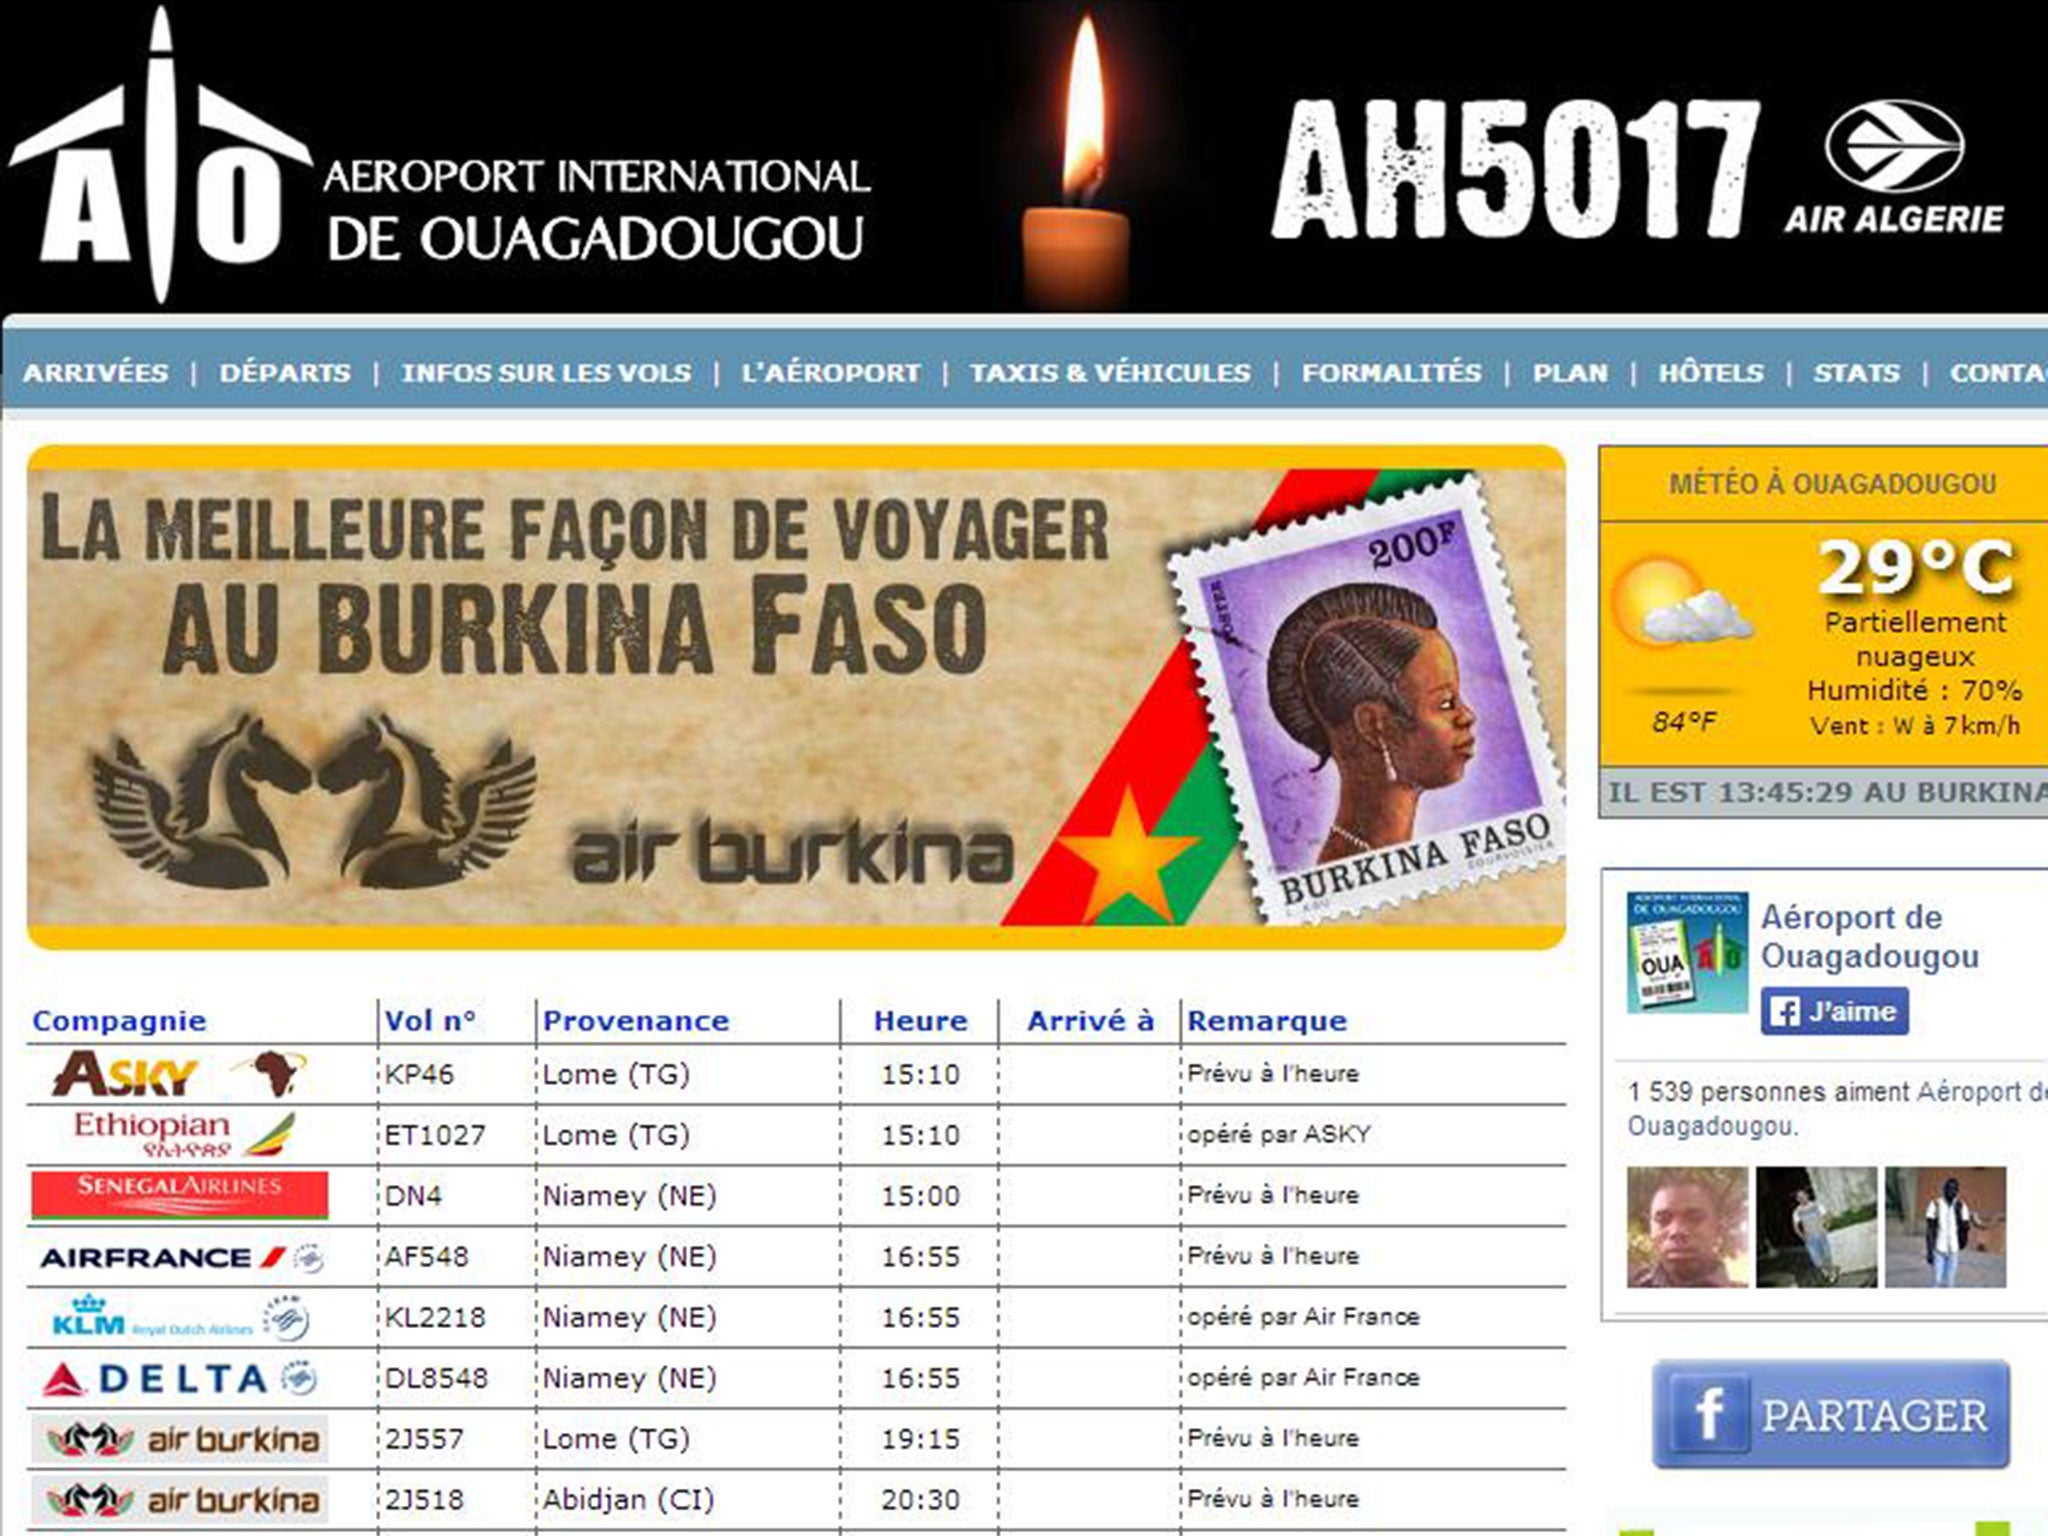 A screen shot of the banner image paying tribute to the AH5017 crash on the ouagadougou airport website